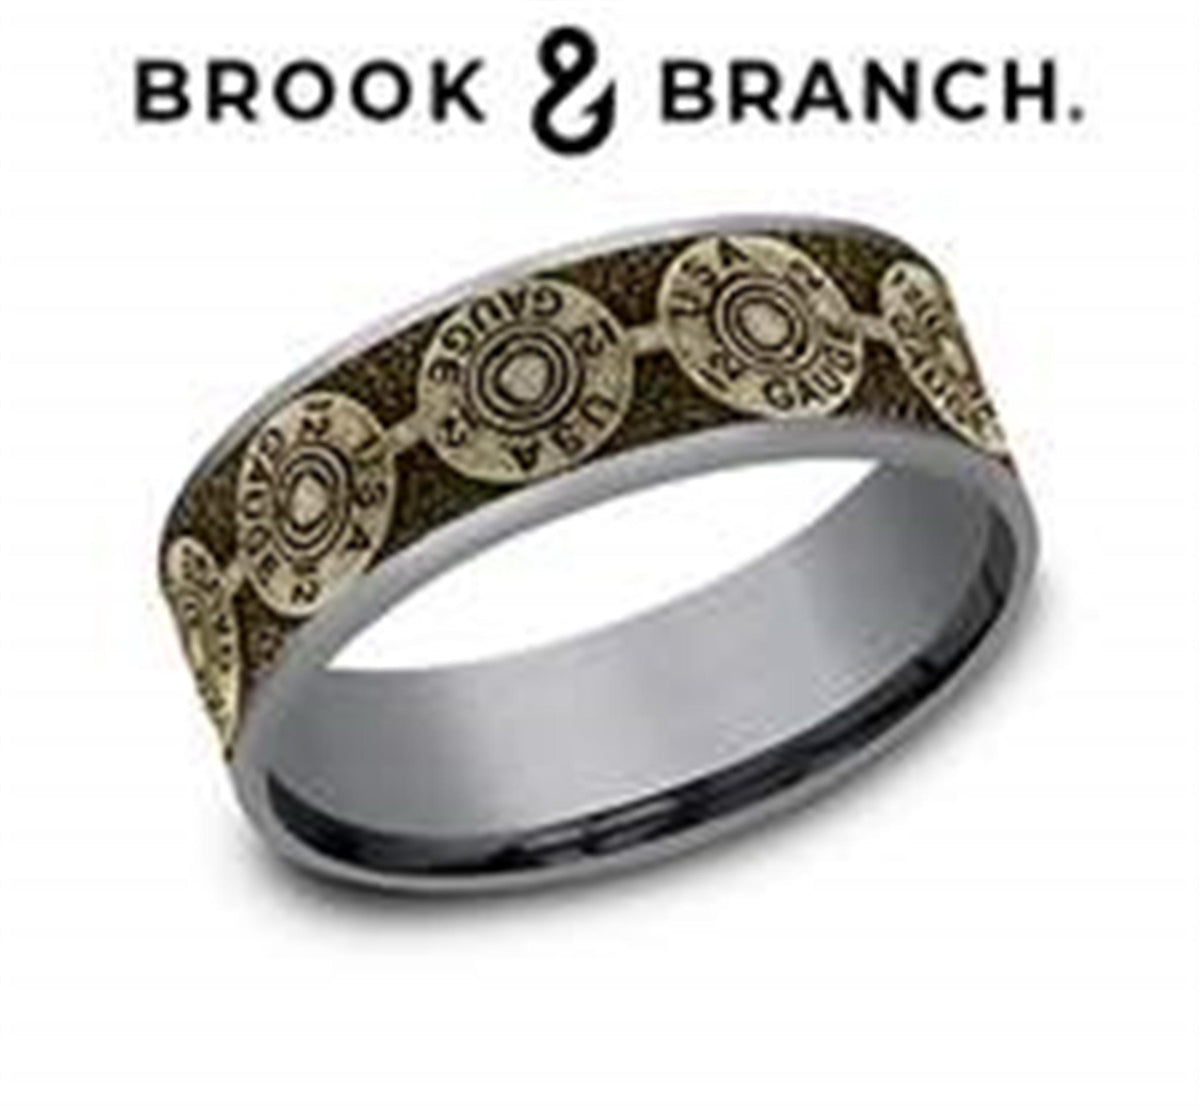 Brook & Branch 14Kt Yellow Gold And Tantalum Band